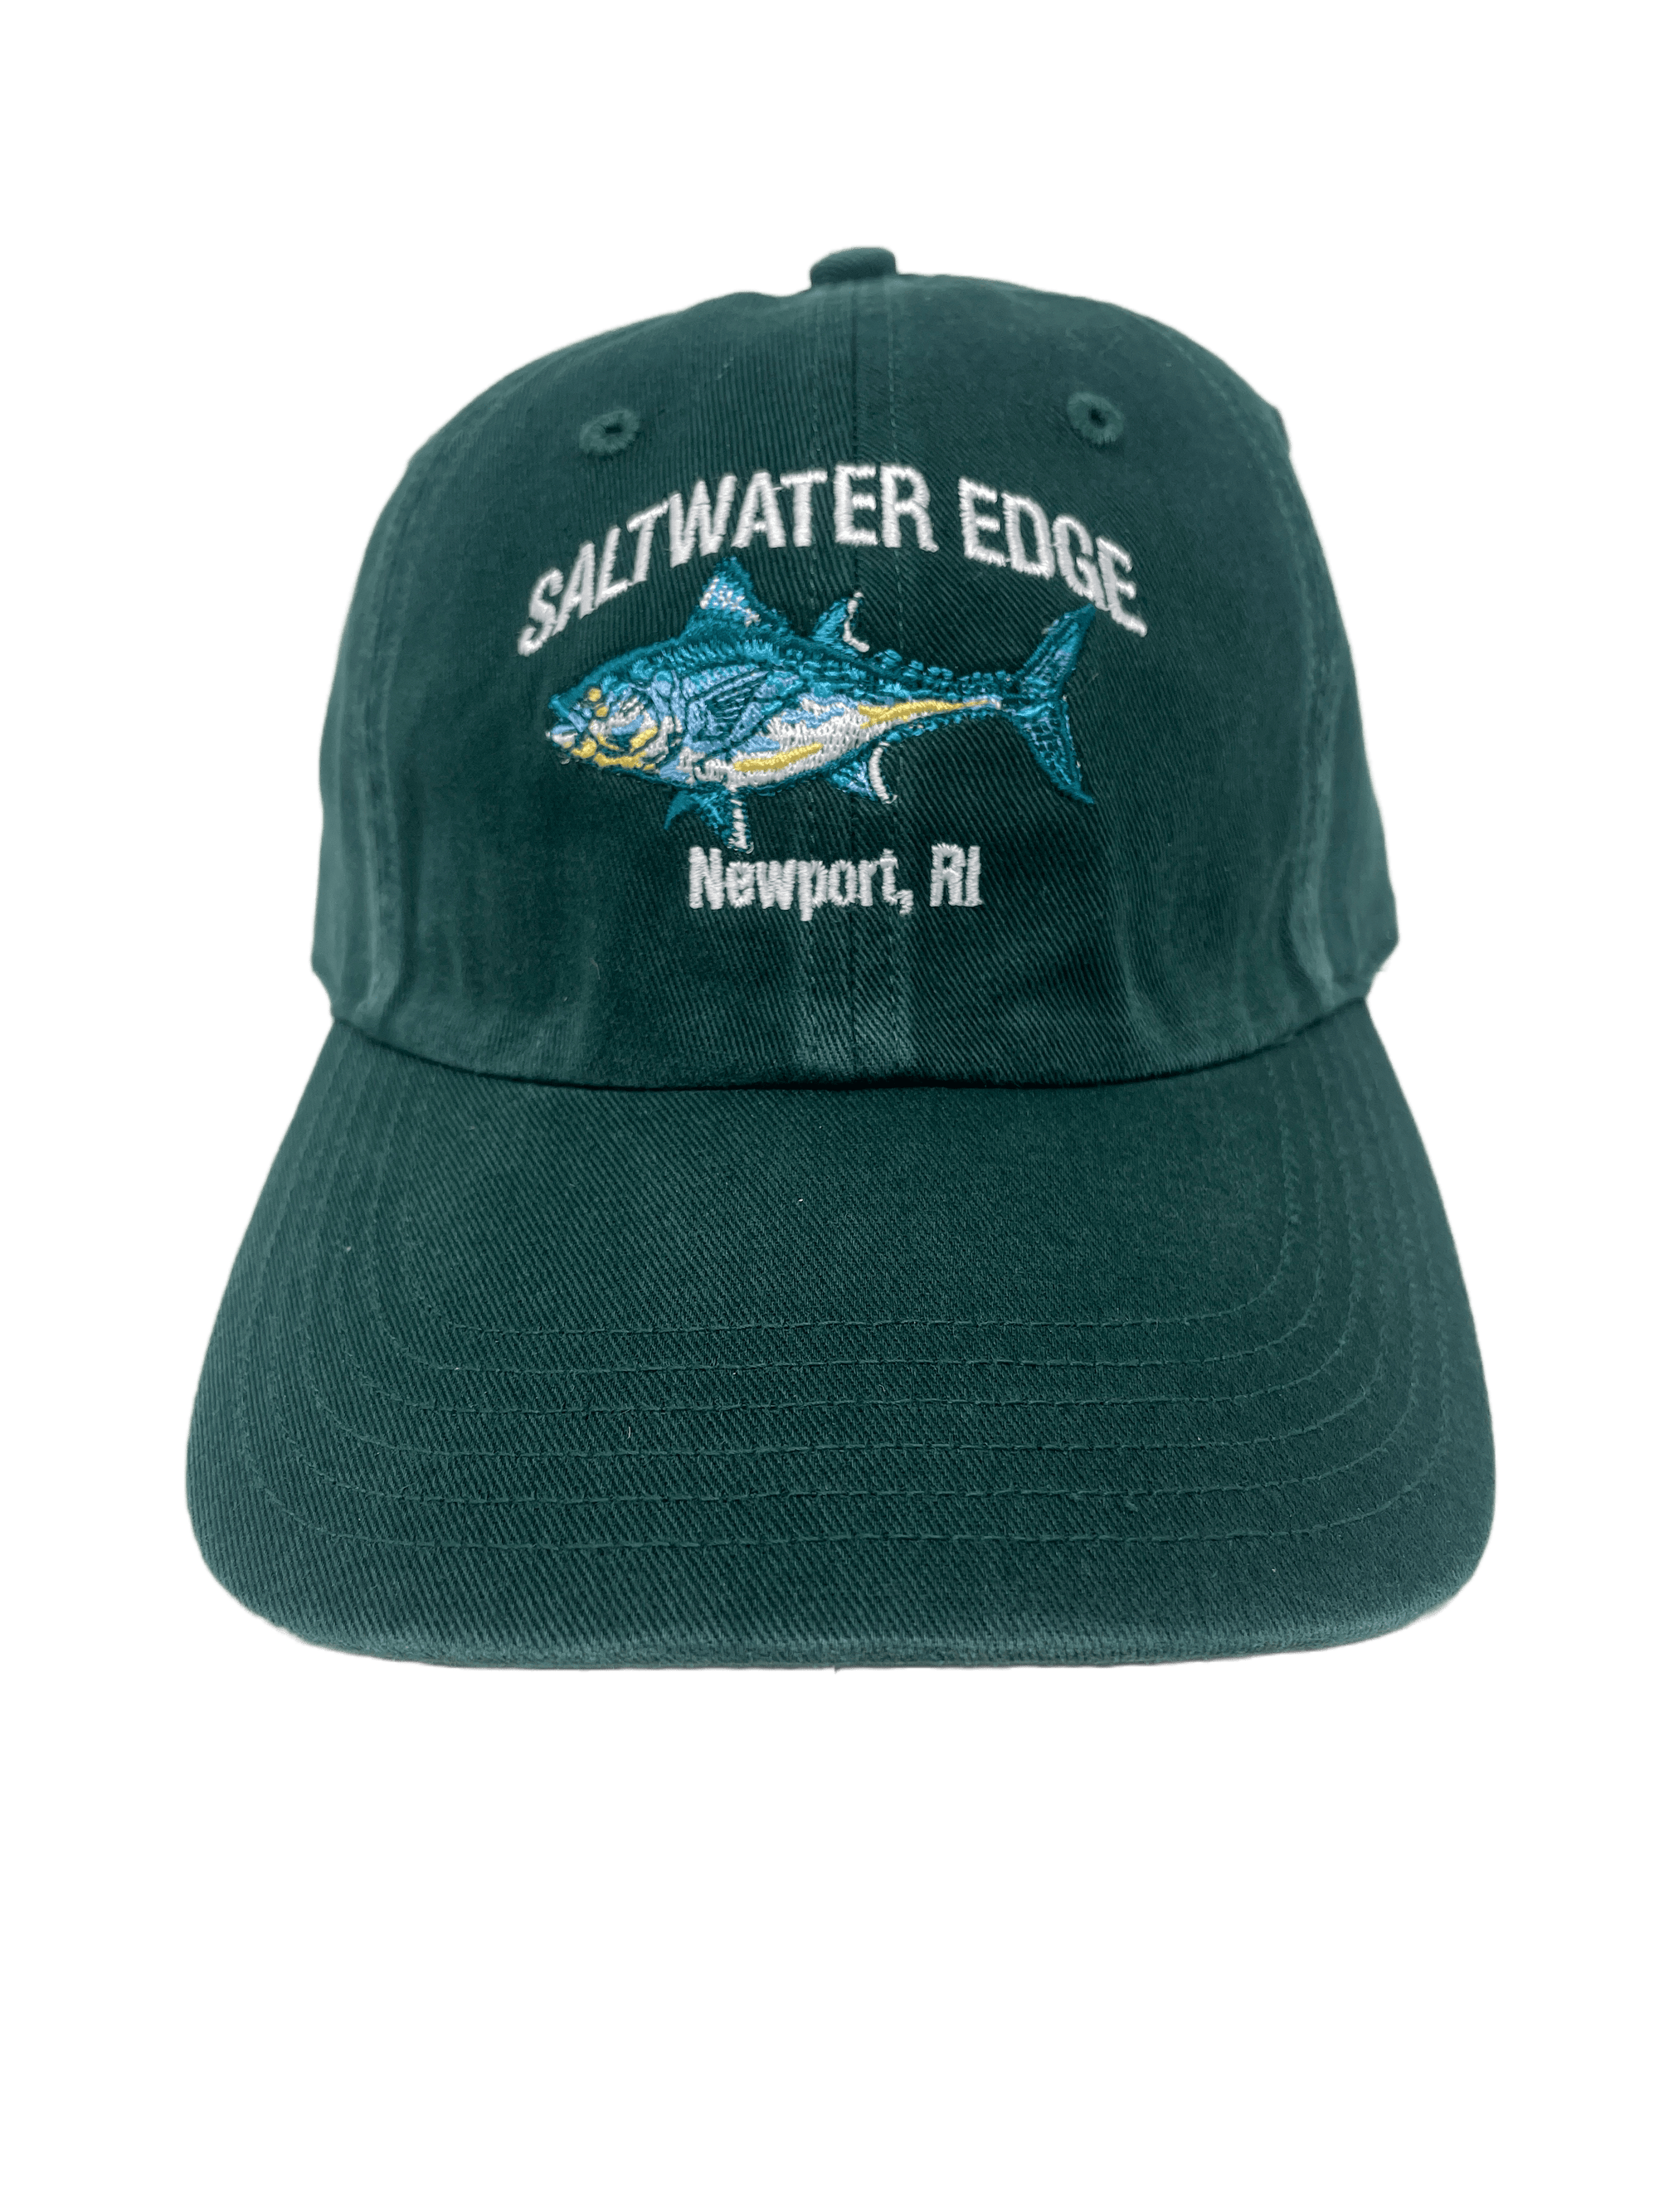 Sun Protective Clothing - The Saltwater Edge